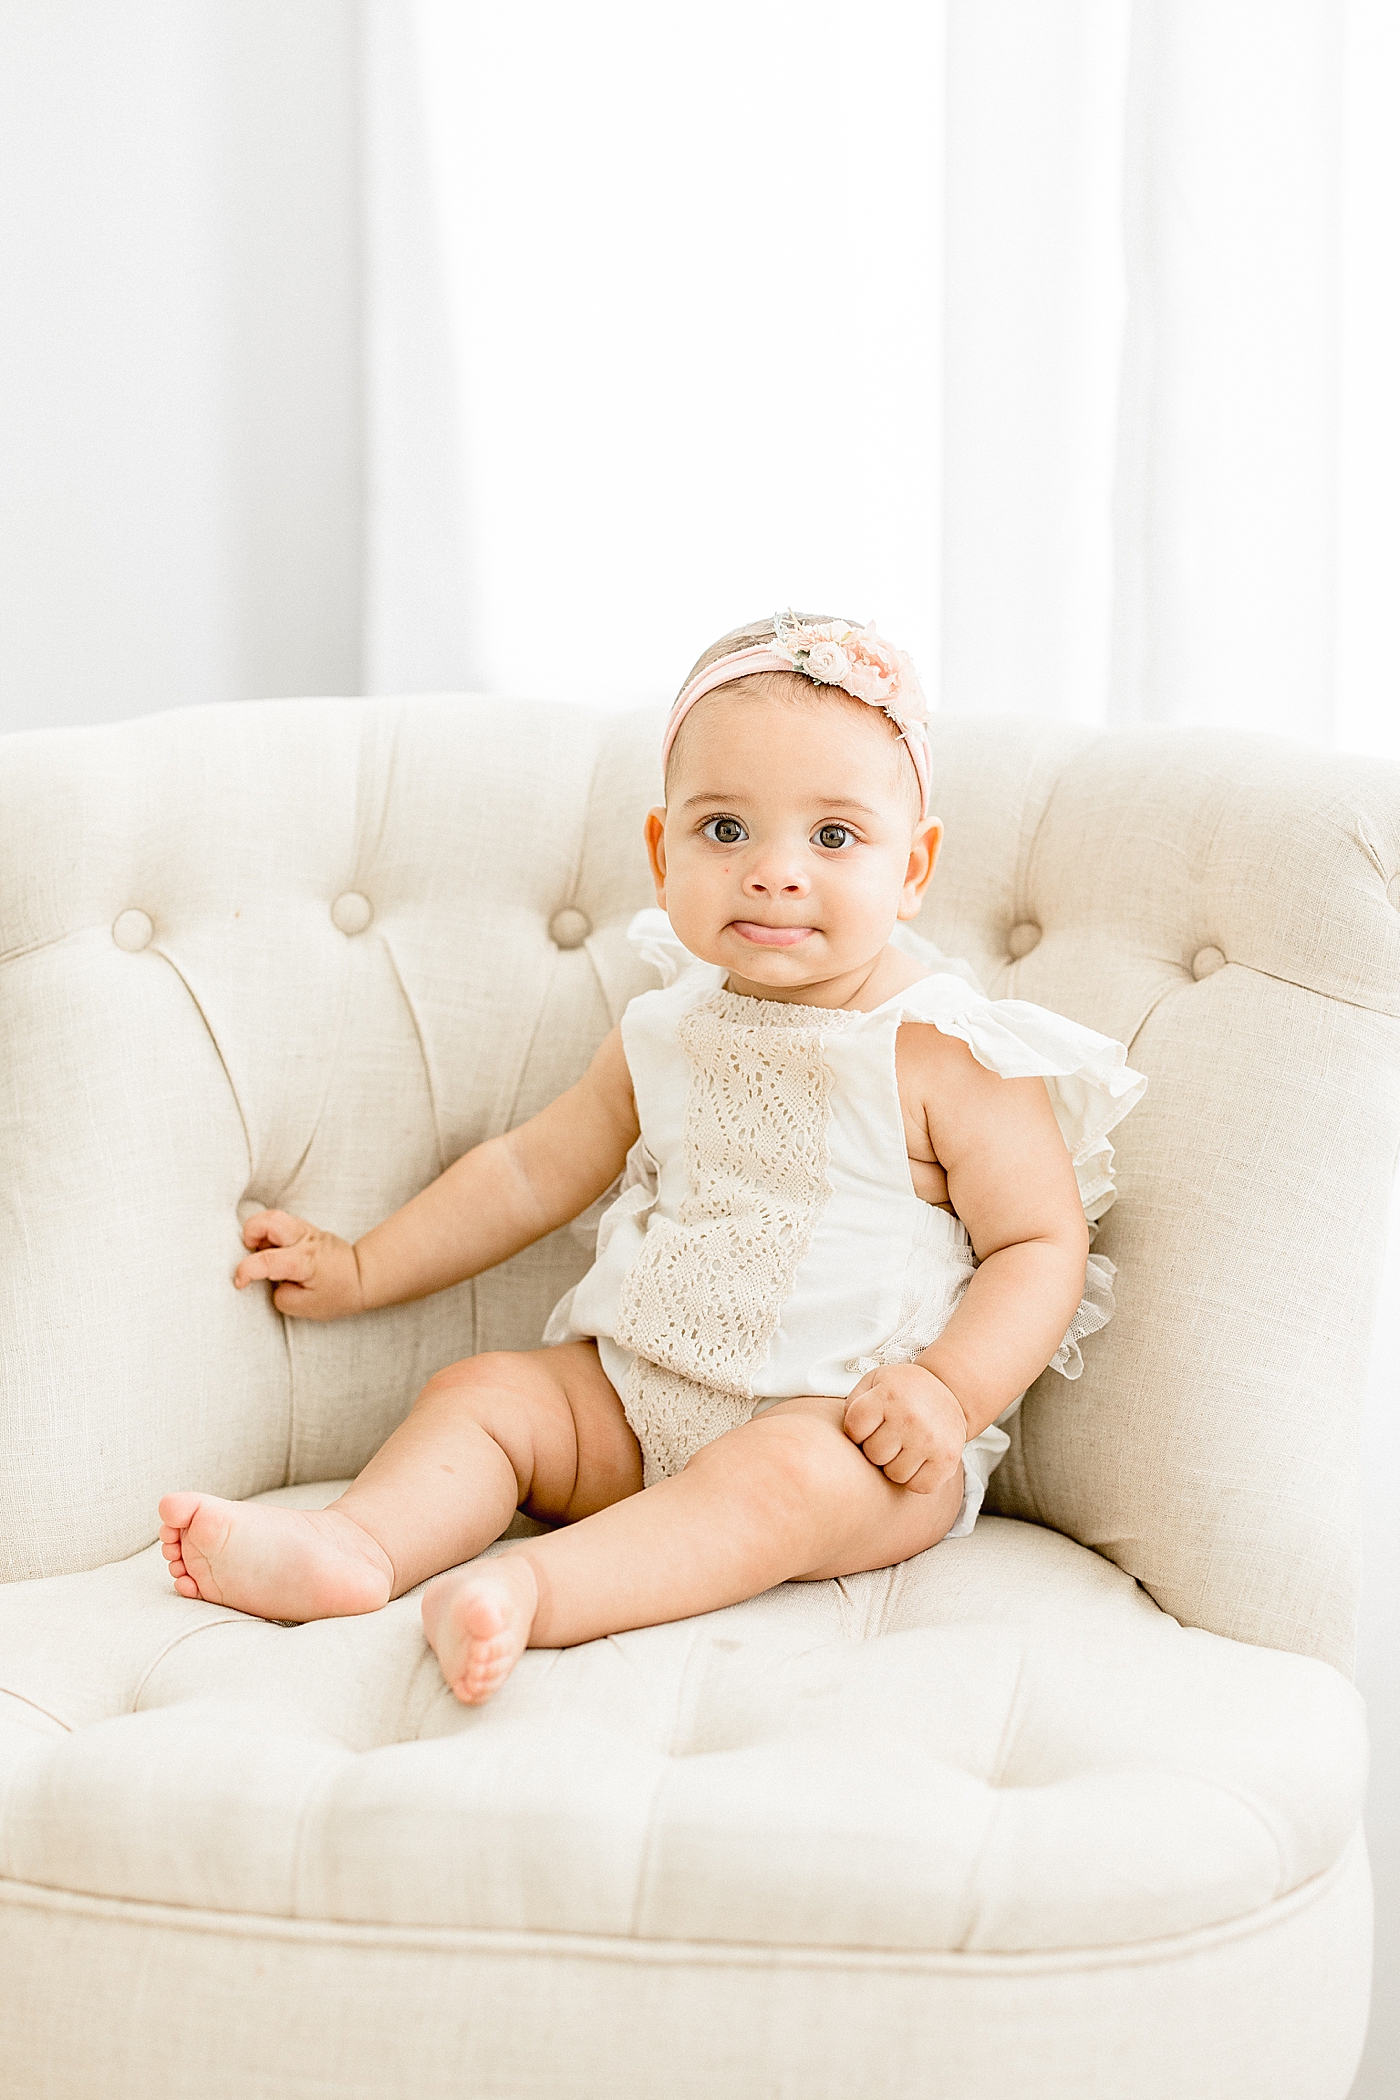 Baby girl in studio celebrating turning six months old. Photo by Brittany Elise Photography.